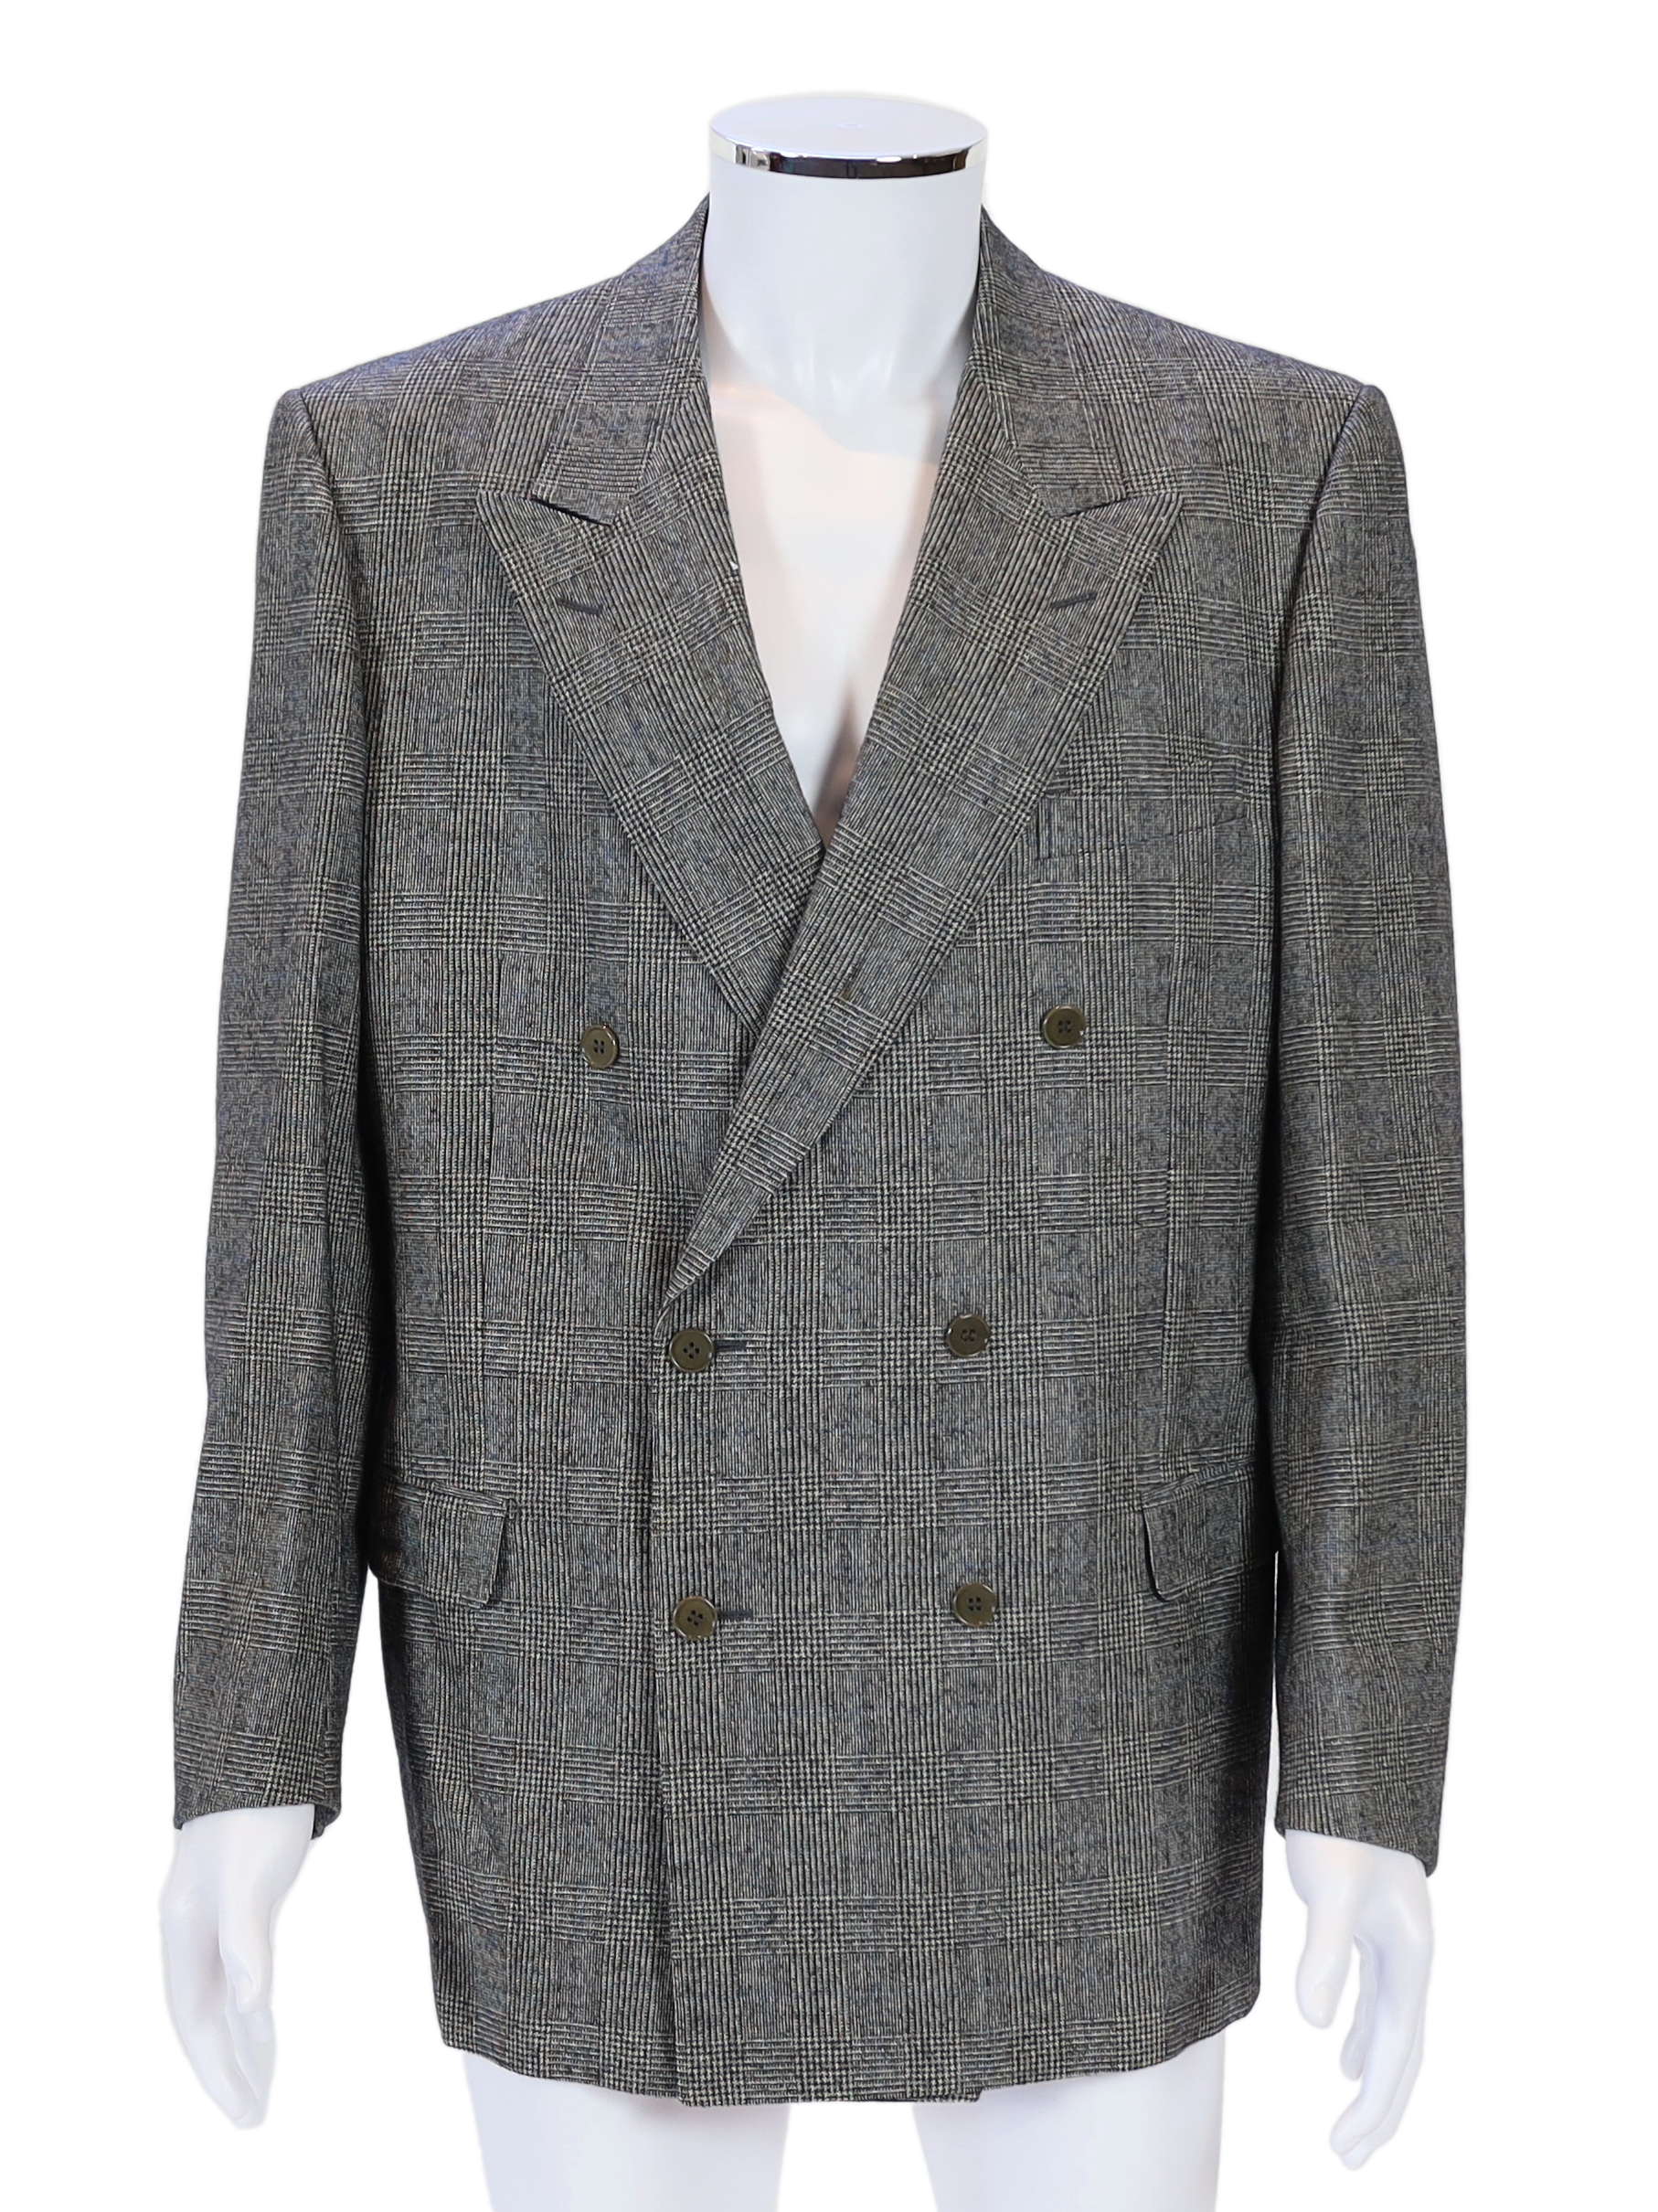 A Yves Saint Laurent rive gauche gentlemen's Prince of Wales check double breasted wool suit, approx size 42